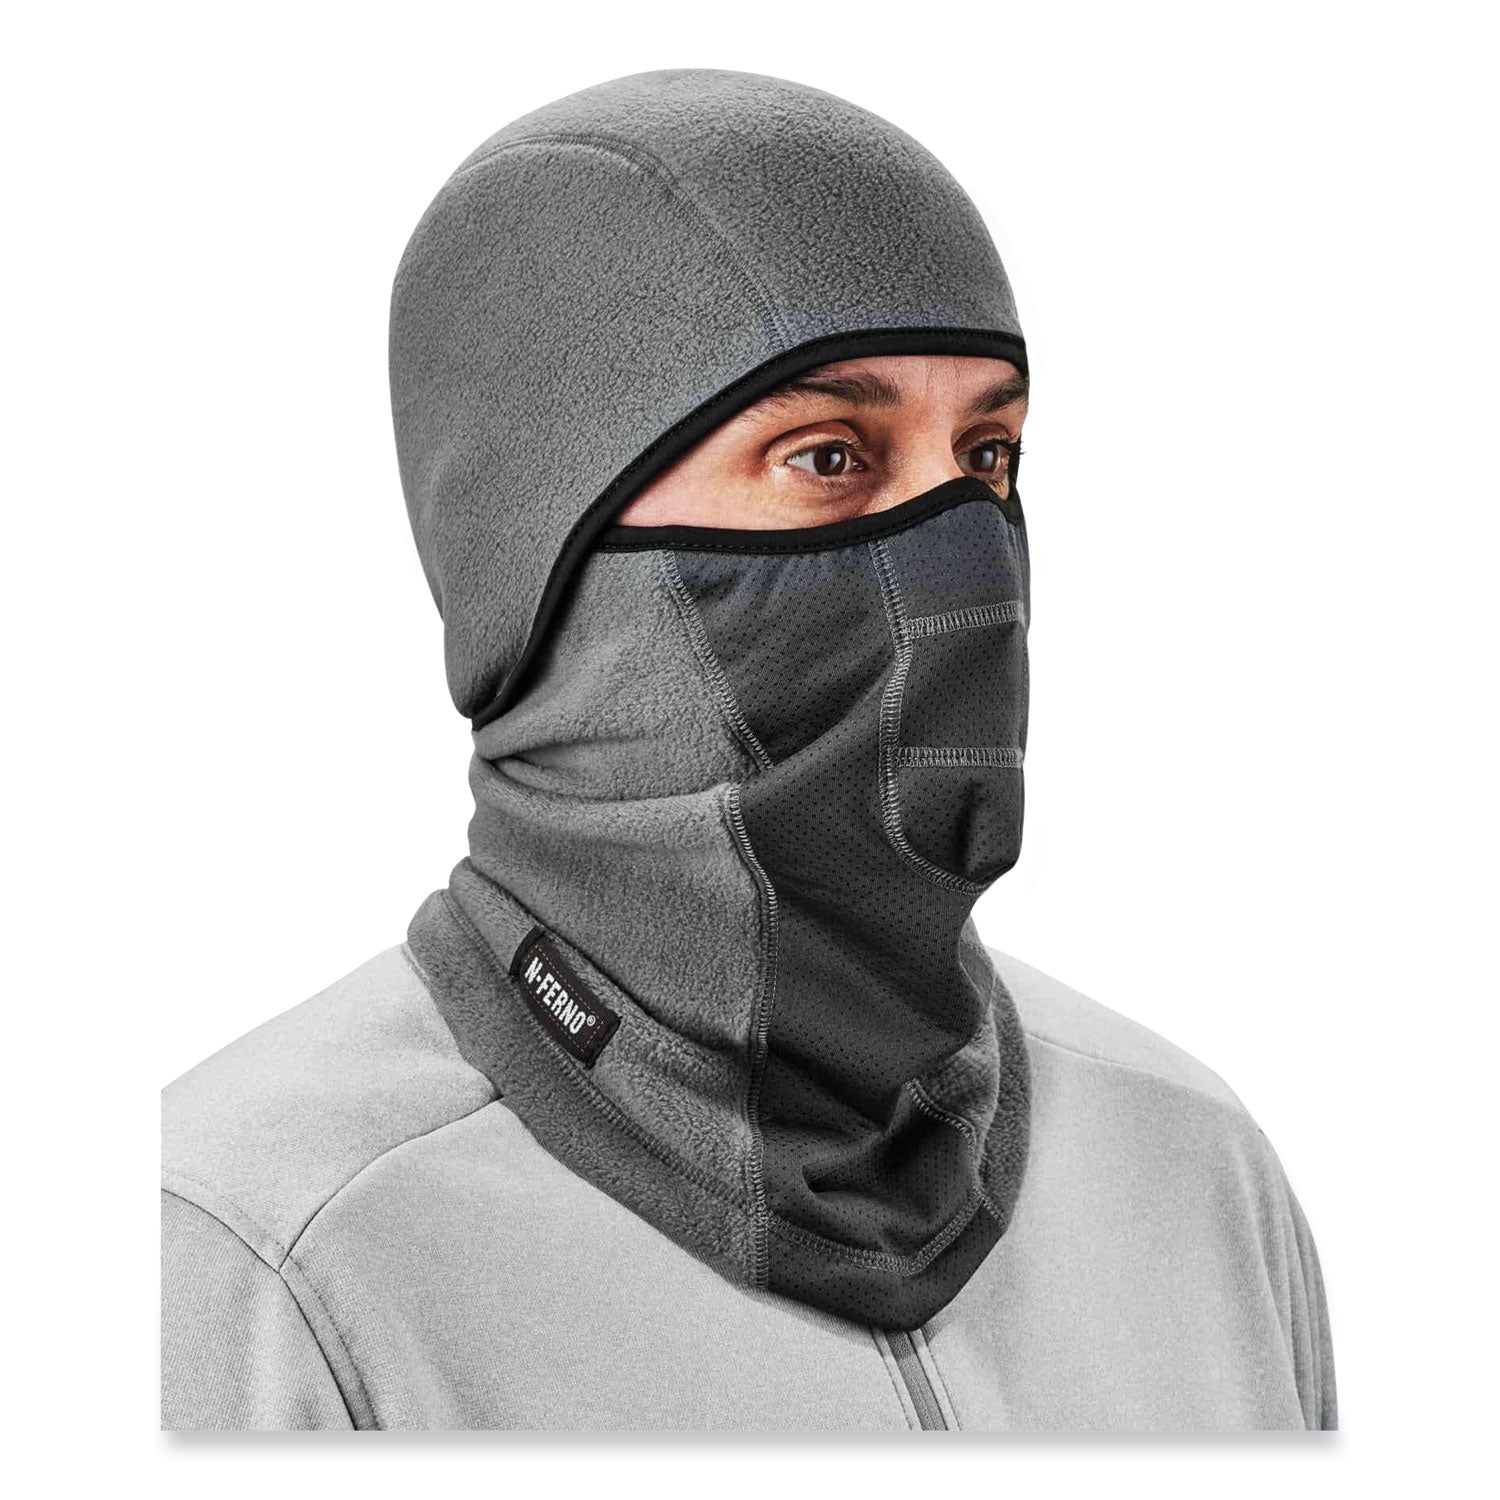 n-ferno-6823-hinged-balaclava-face-mask-fleece-one-size-fits-most-gray-ships-in-1-3-business-days_ego16835 - 8